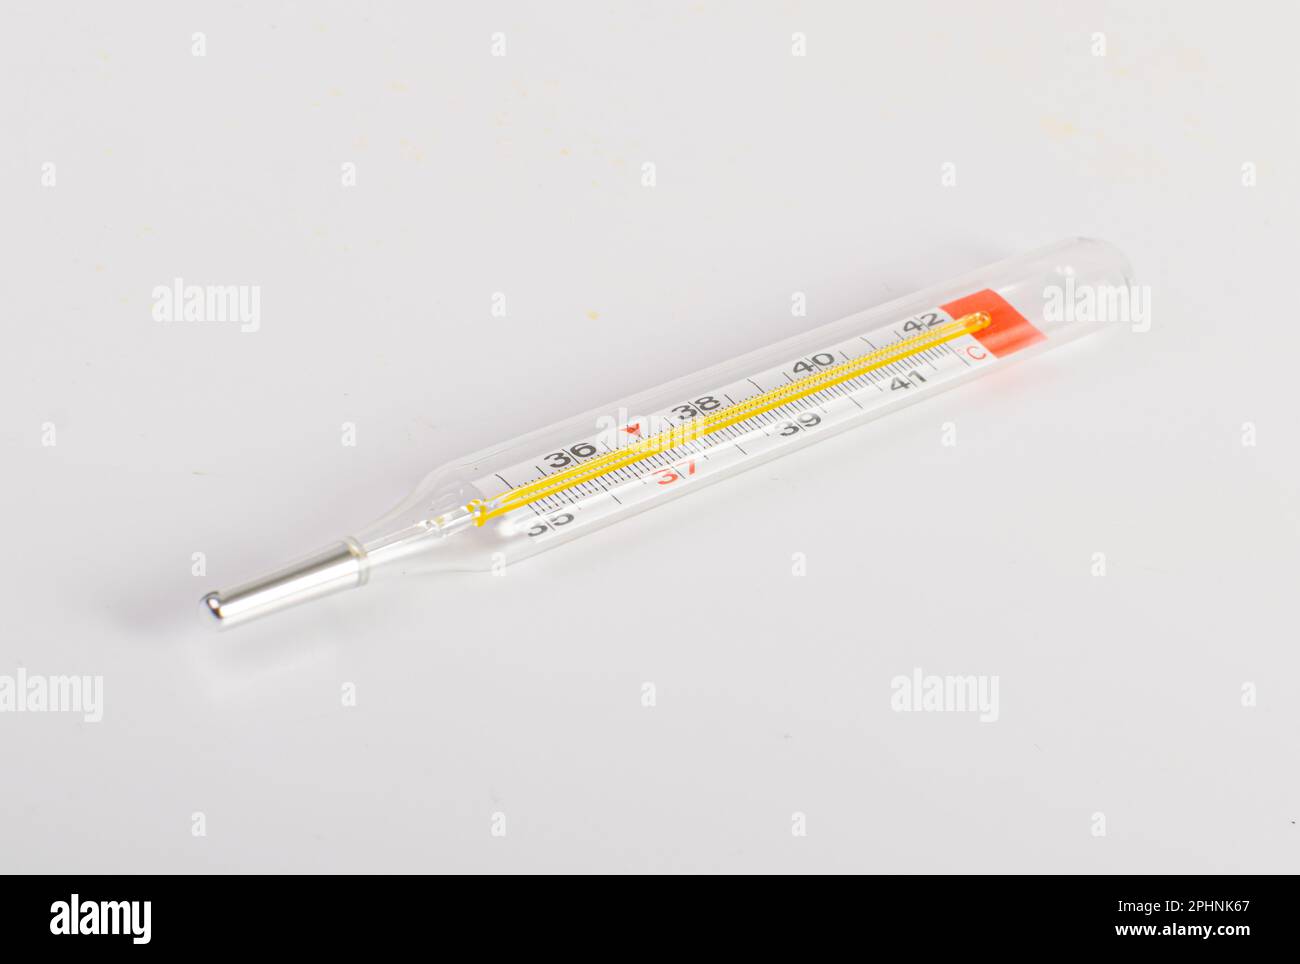 Thermometer for Measuring Air Temperature. Stock Image - Image of classic,  interior: 75133845